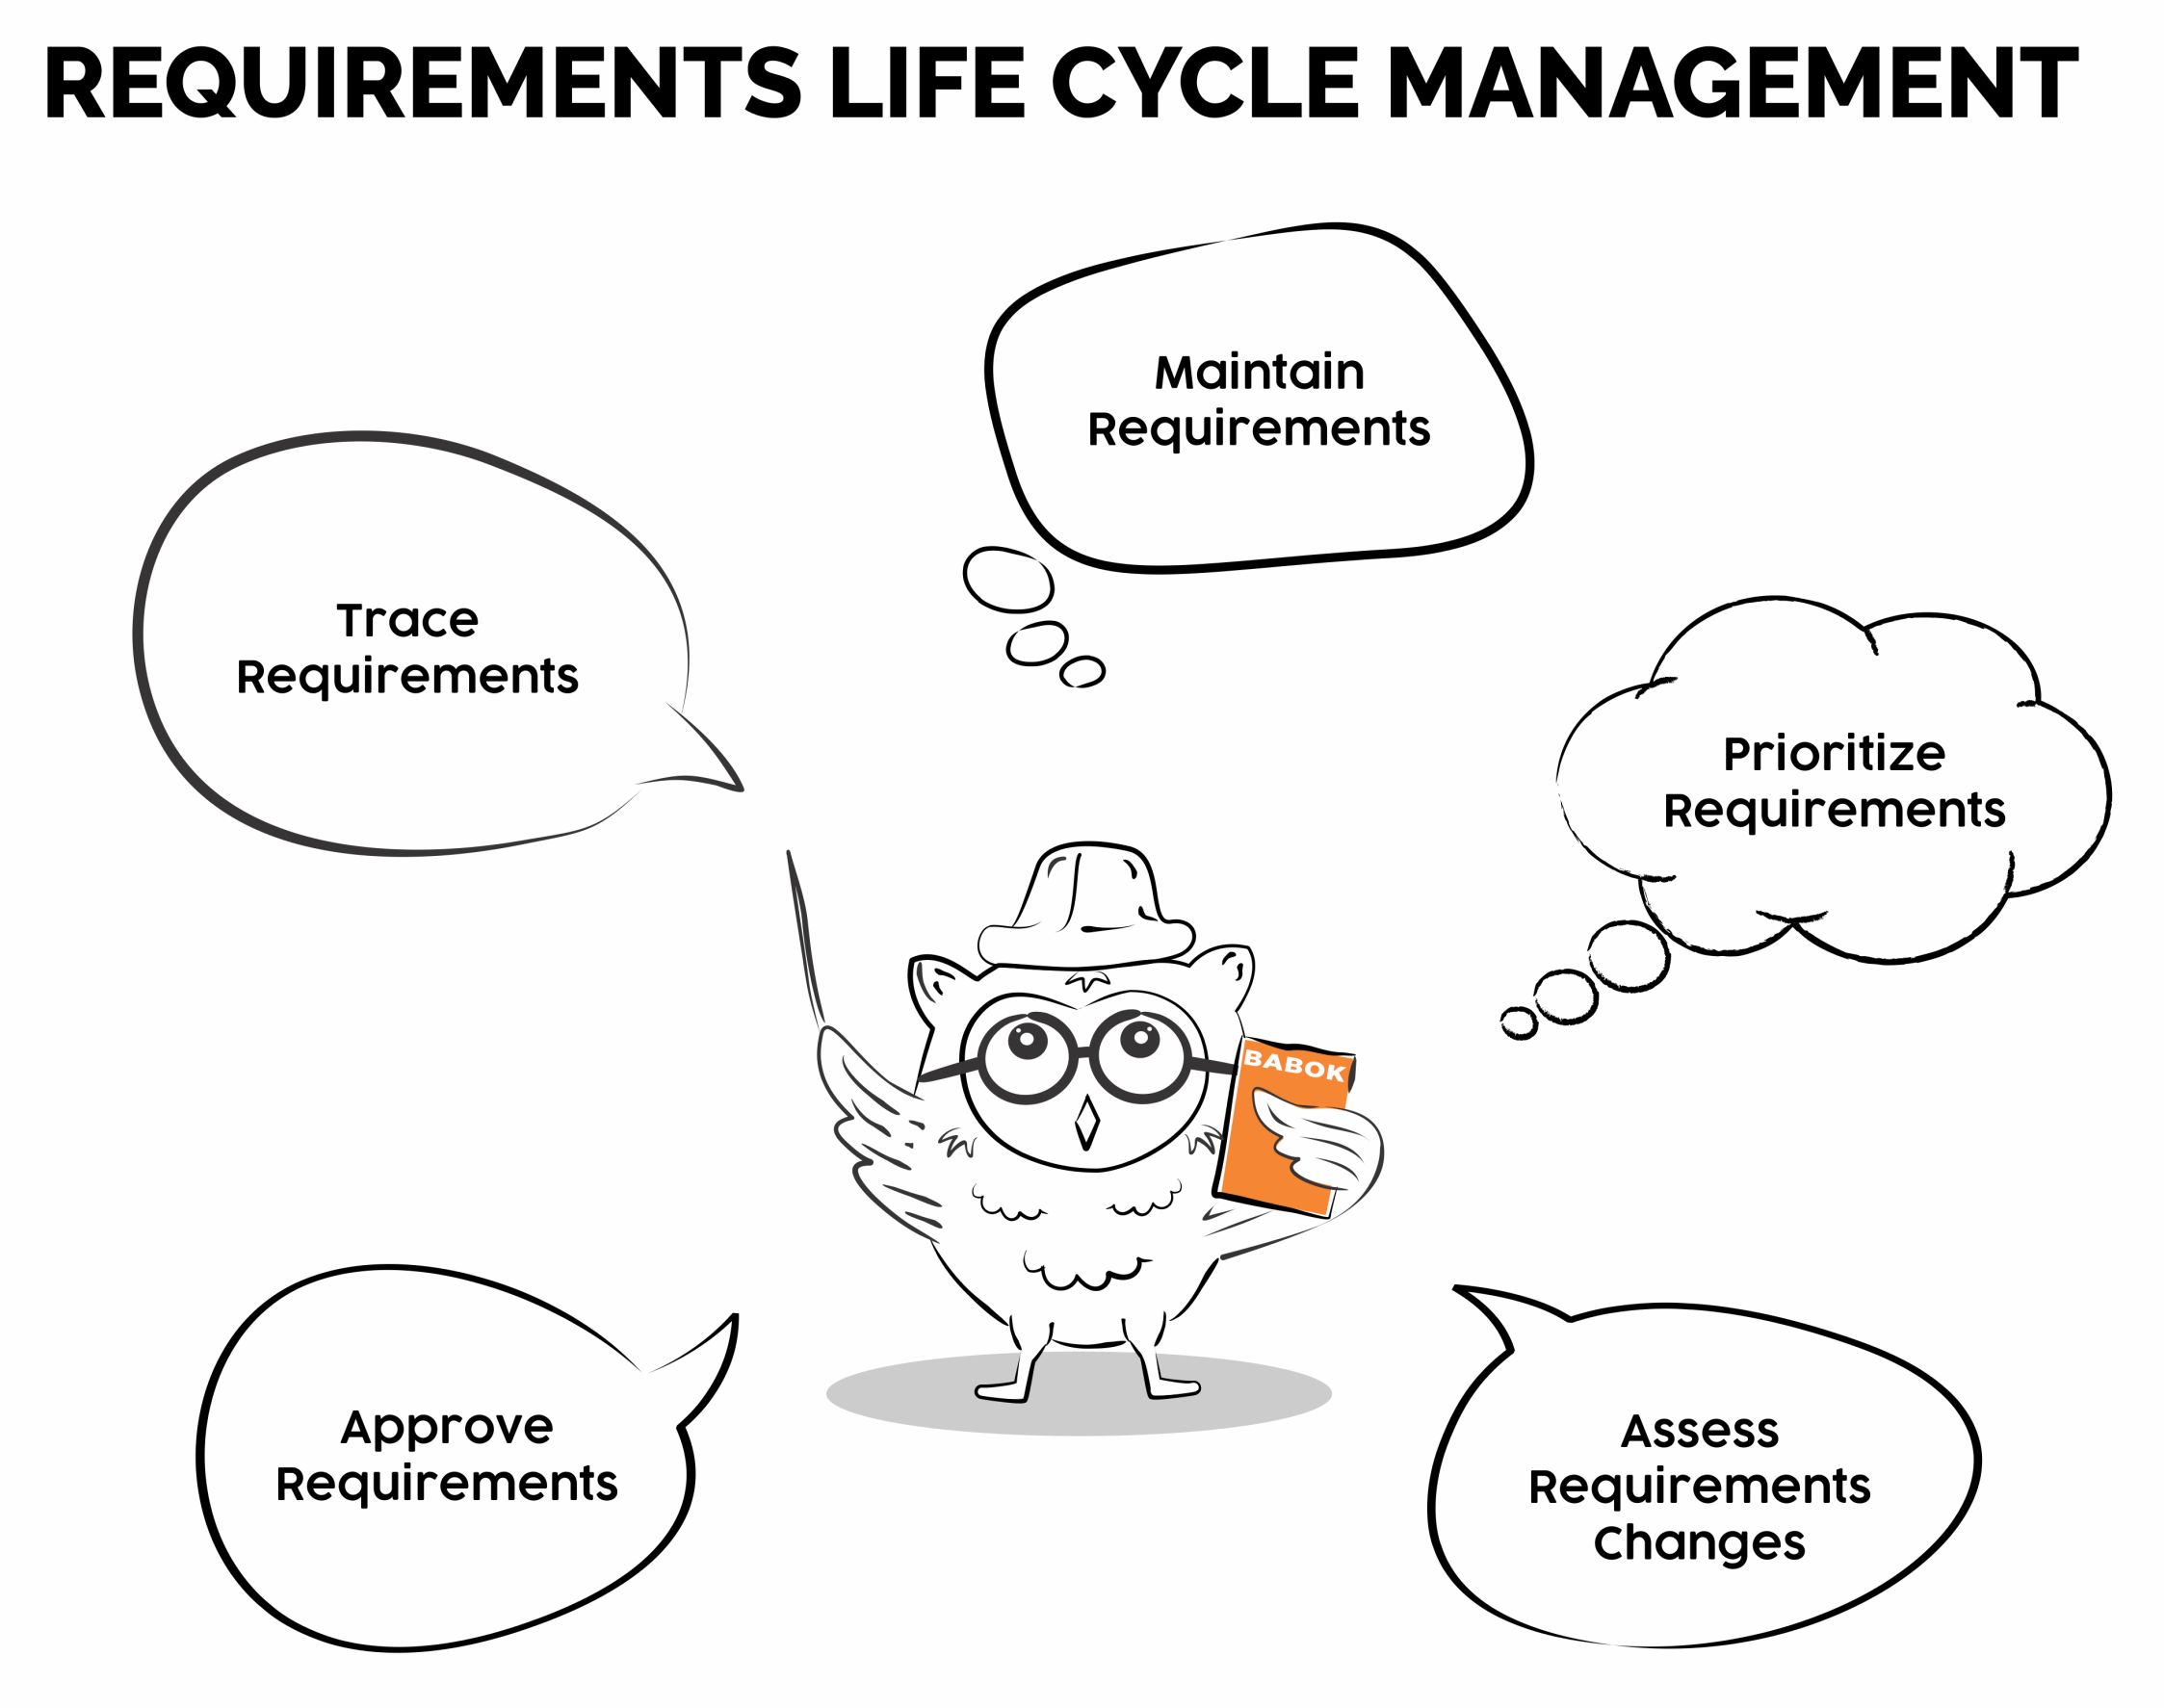 Requirements life cycle management by a Business Analyst for outsourced software product development projects.